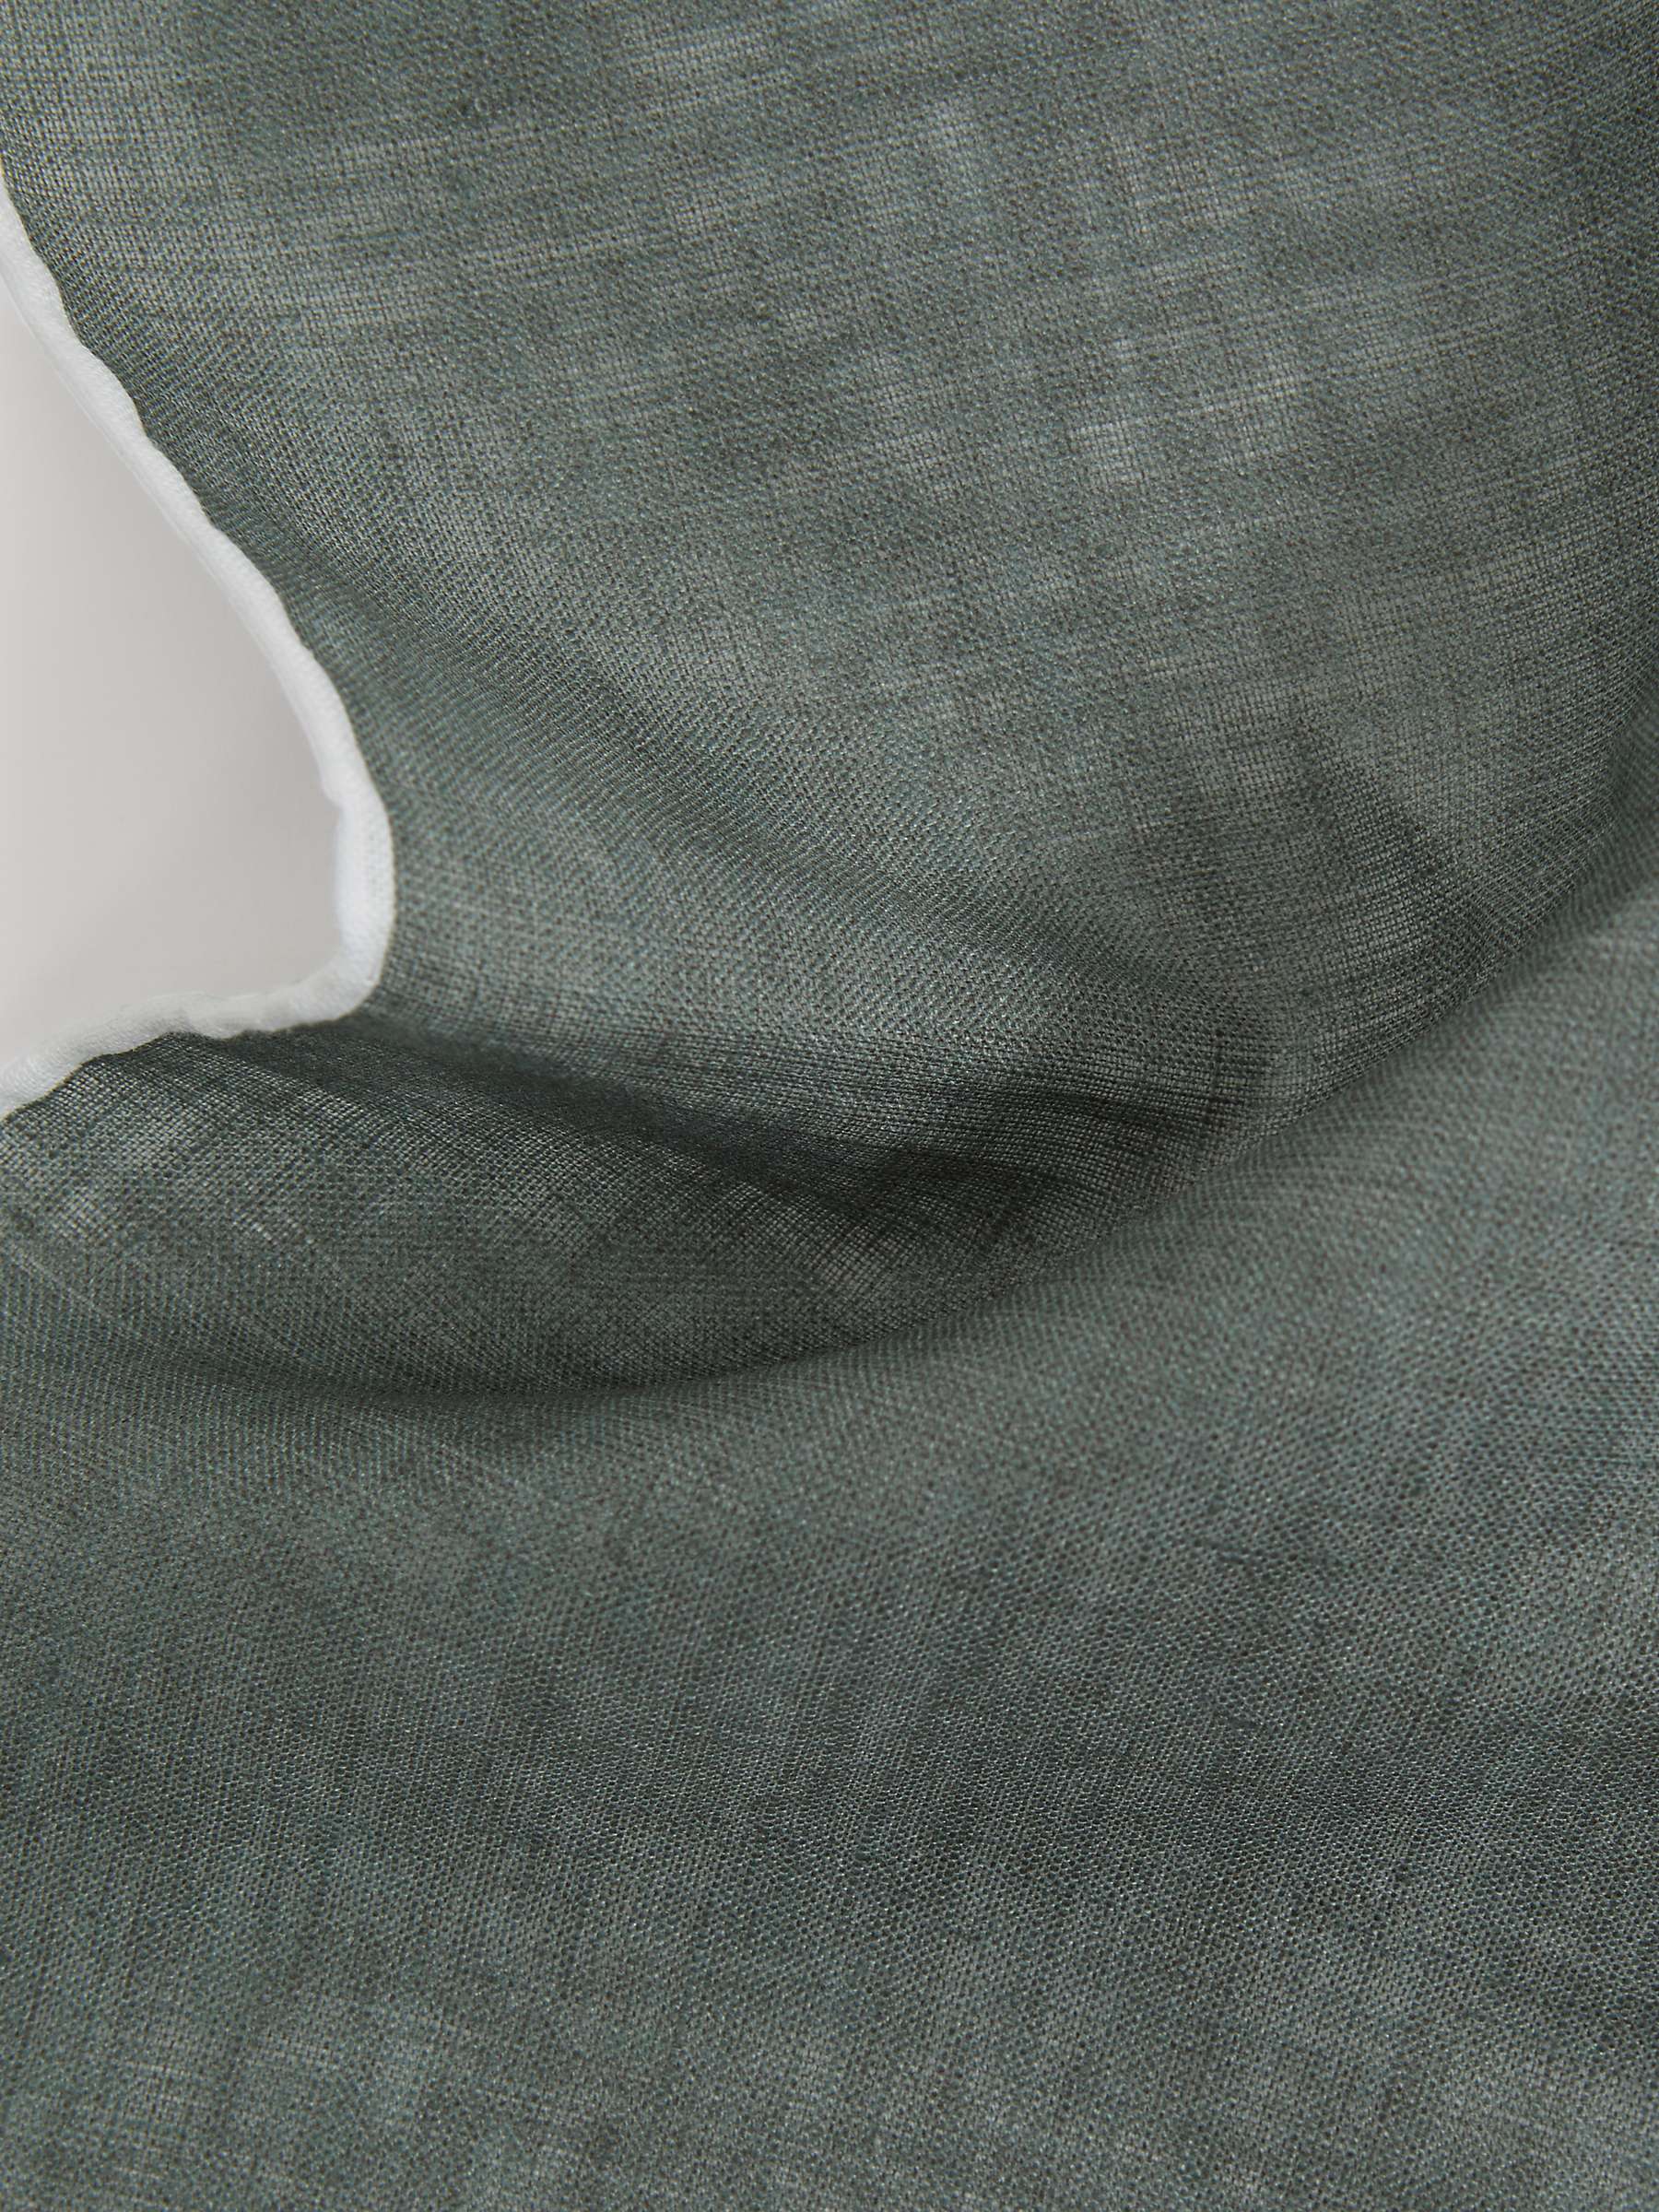 Buy Reiss Siracusa Linen Pocket Square Online at johnlewis.com